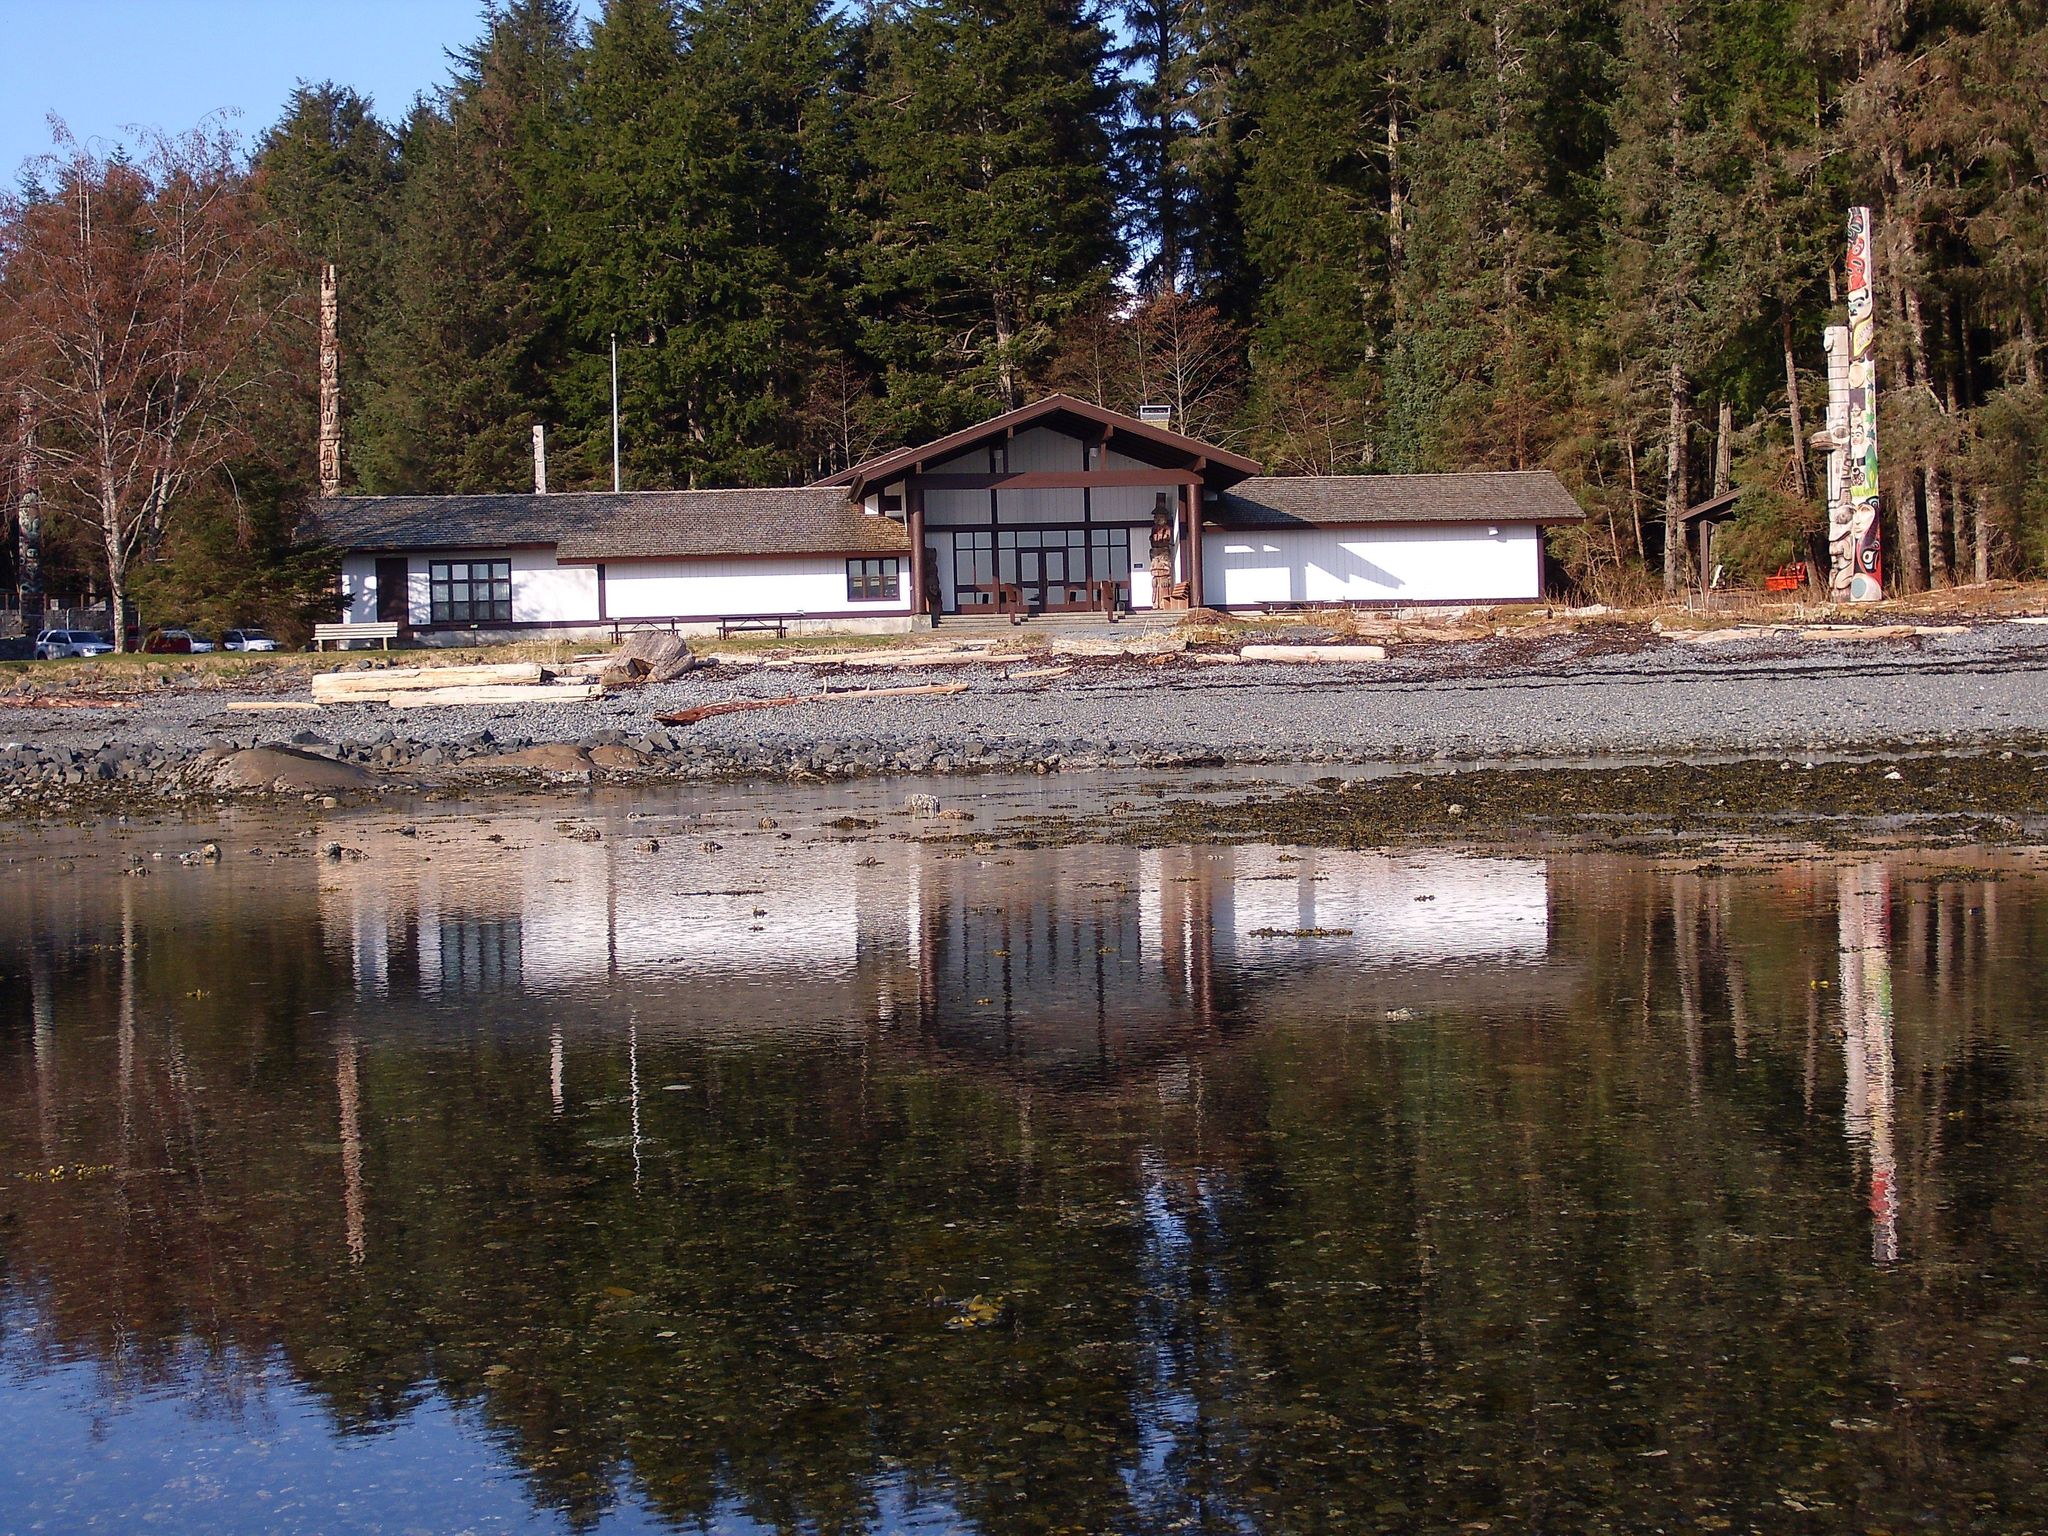 The Visitor Center contains exhibits, a 15 minute park video, and Tlingit and Haida art.